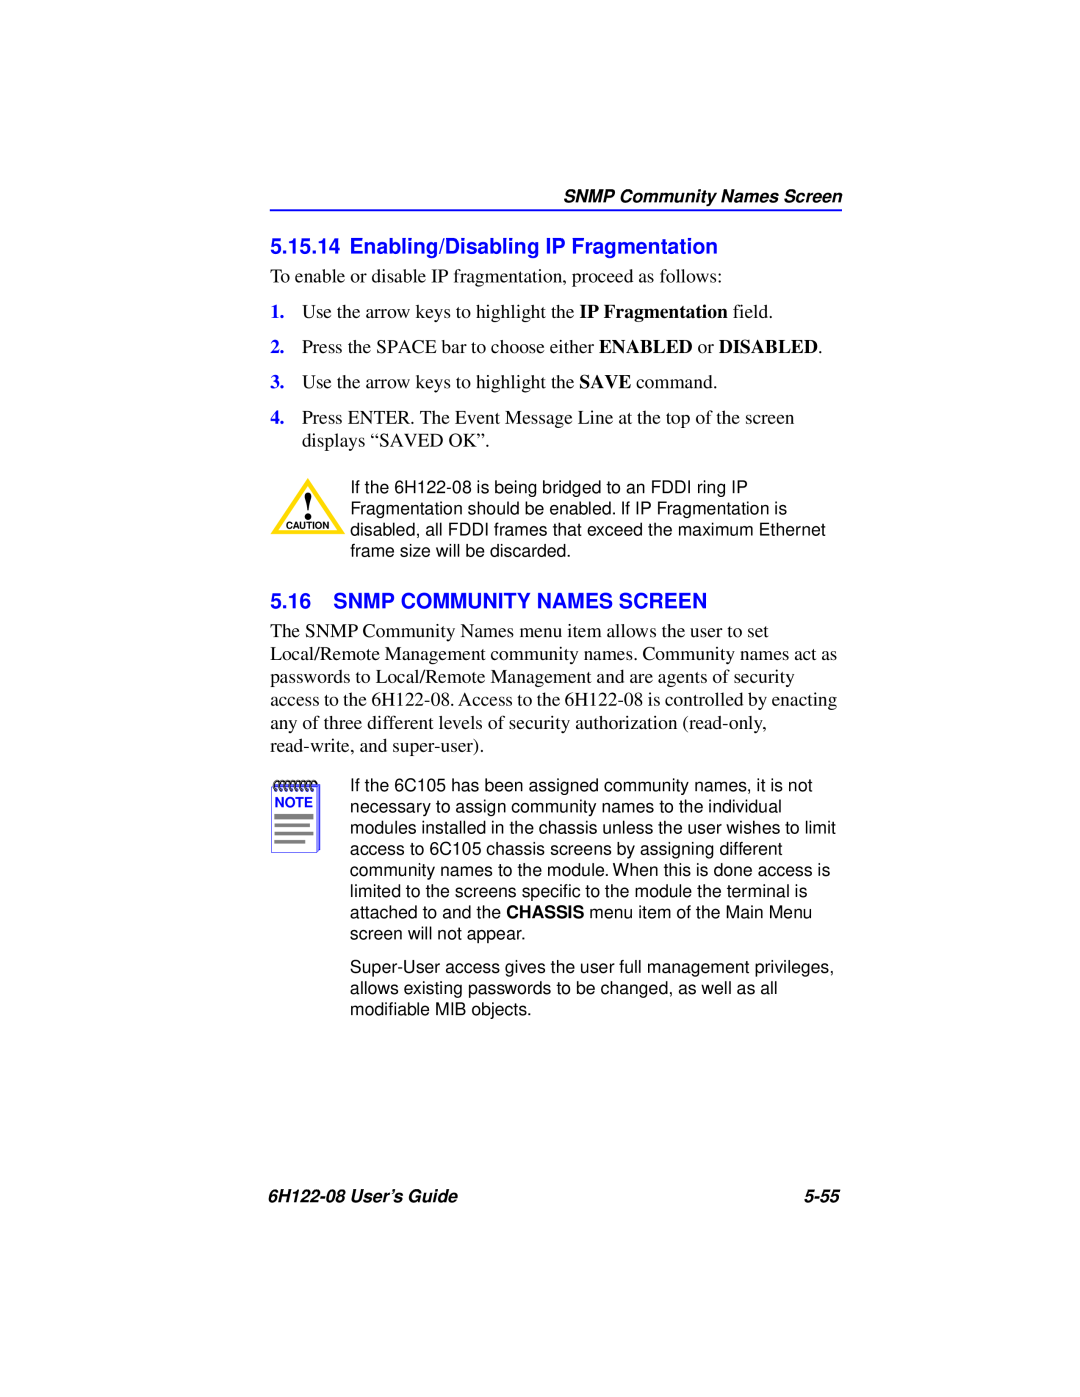 Cabletron Systems 6H122-08 manual Enabling/Disabling IP Fragmentation, Snmp Community Names Screen 